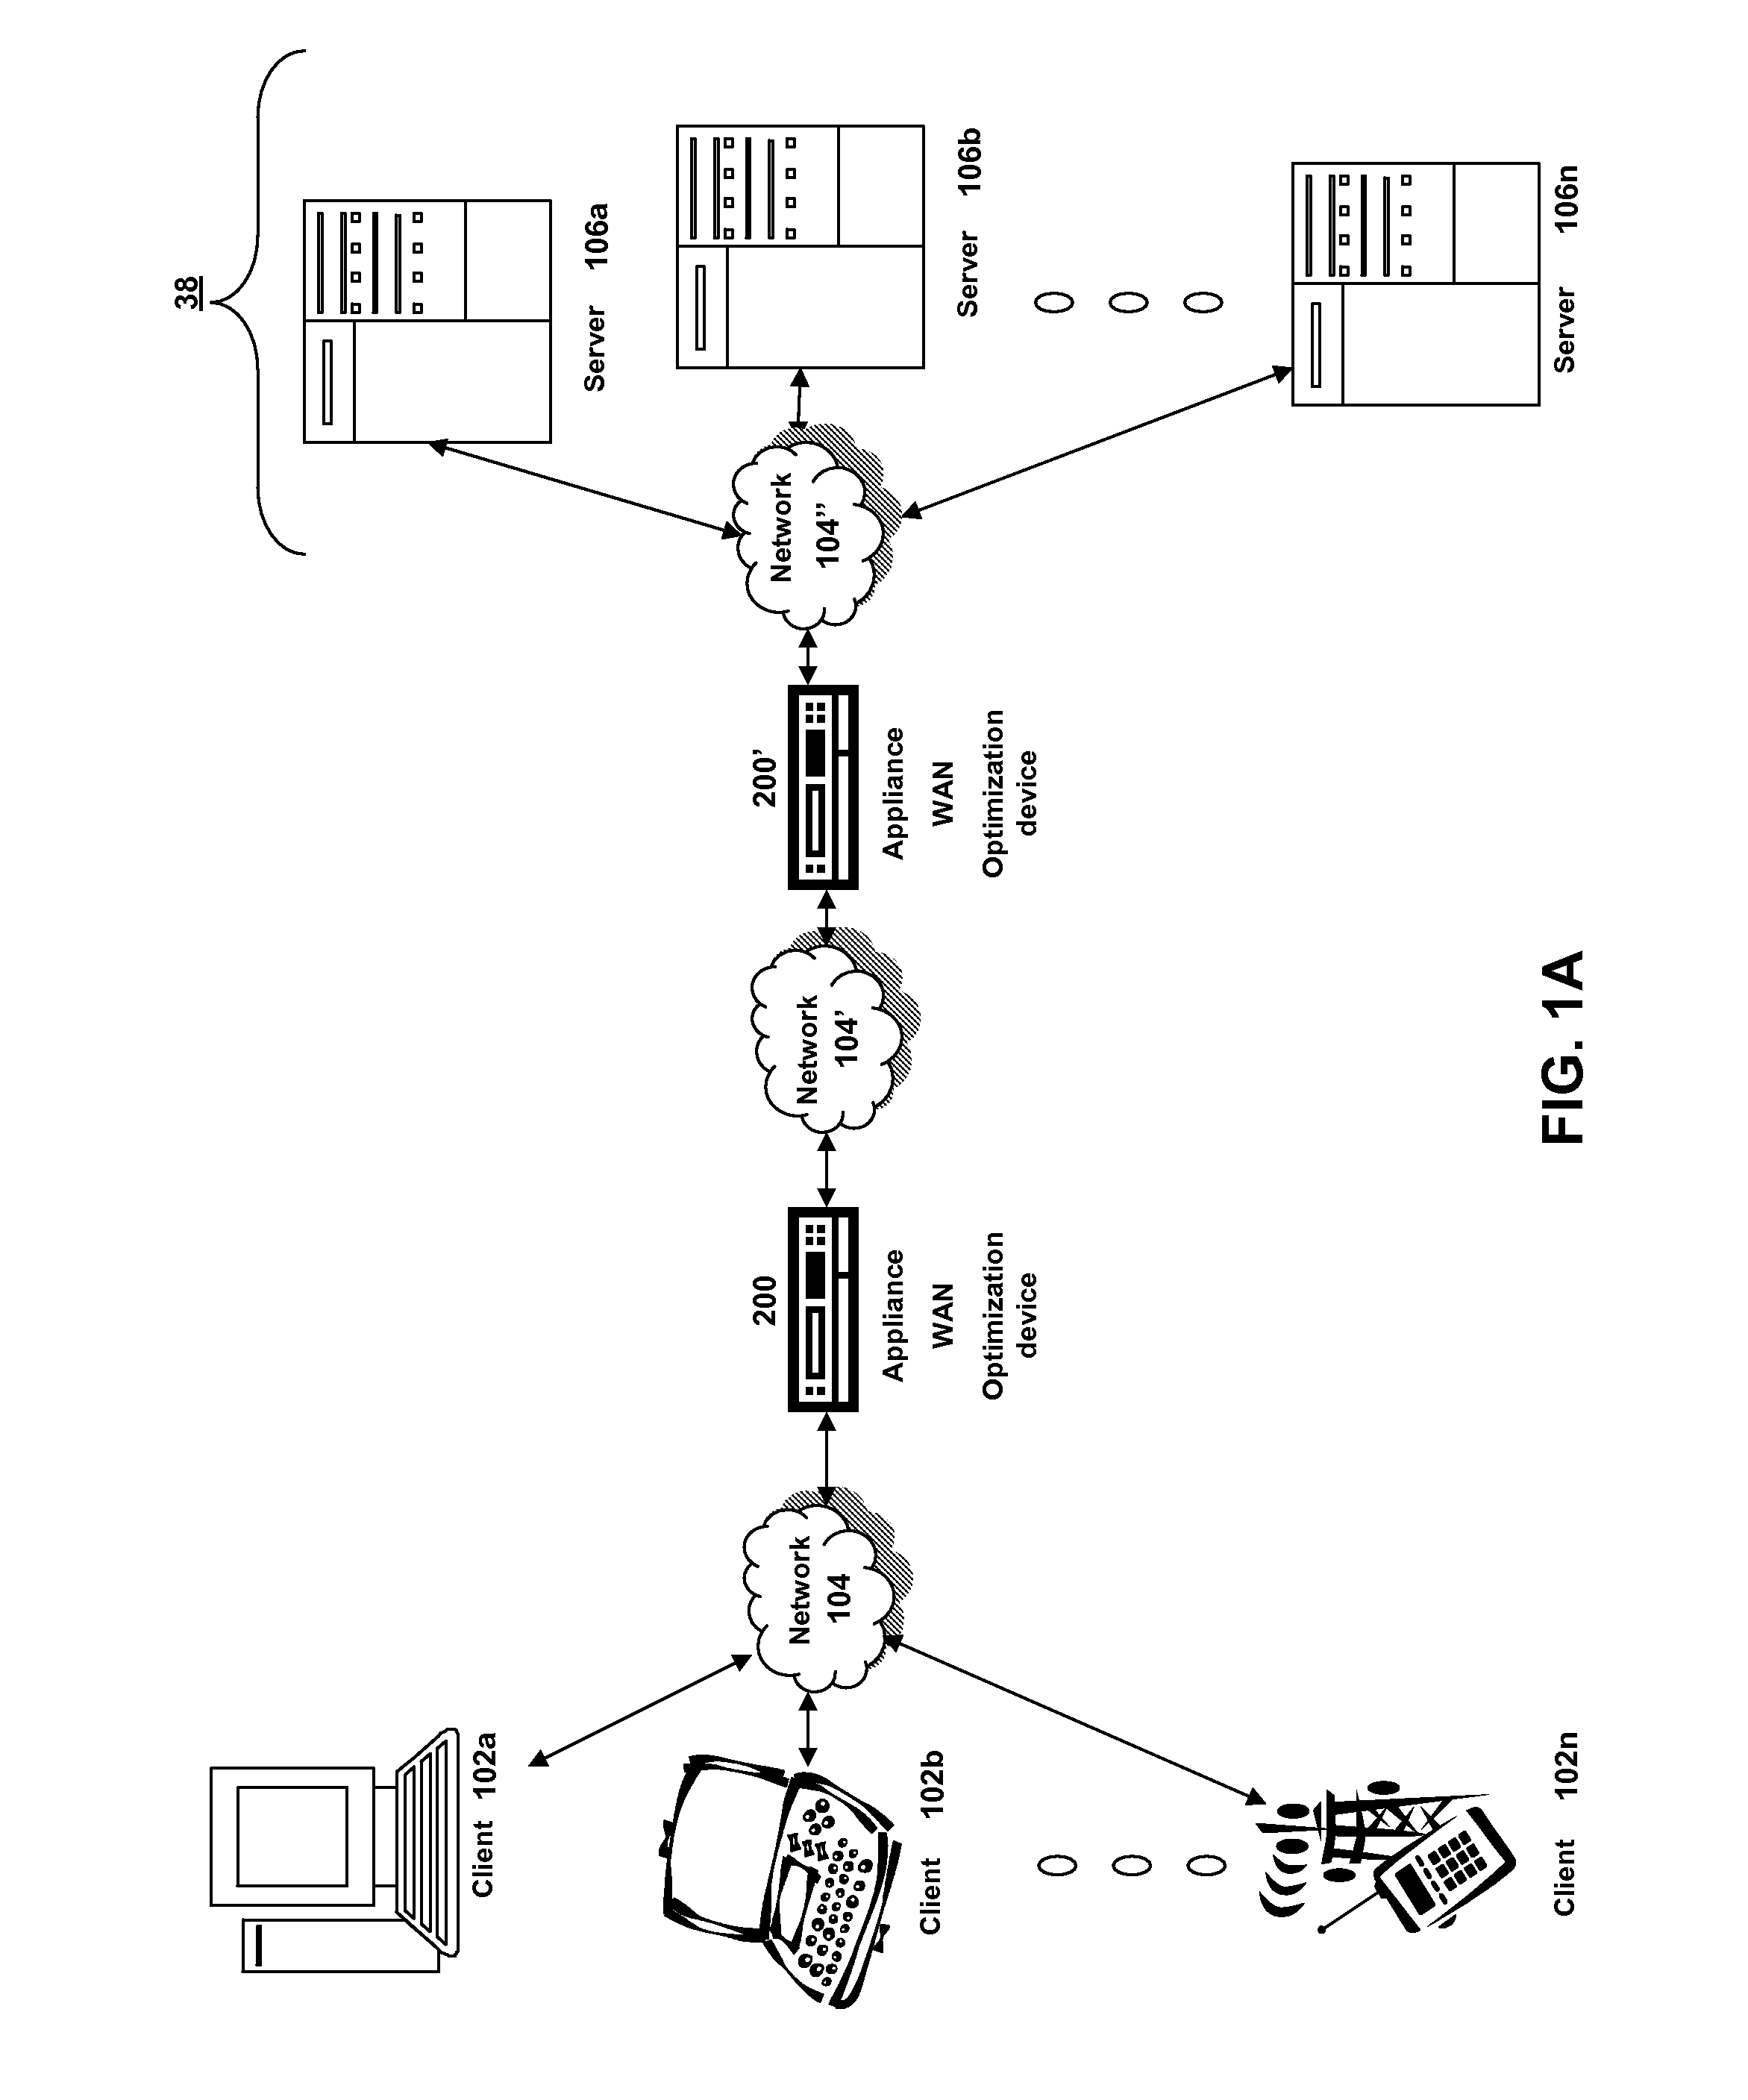 Systems and methods for sharing compression histories between multiple devices